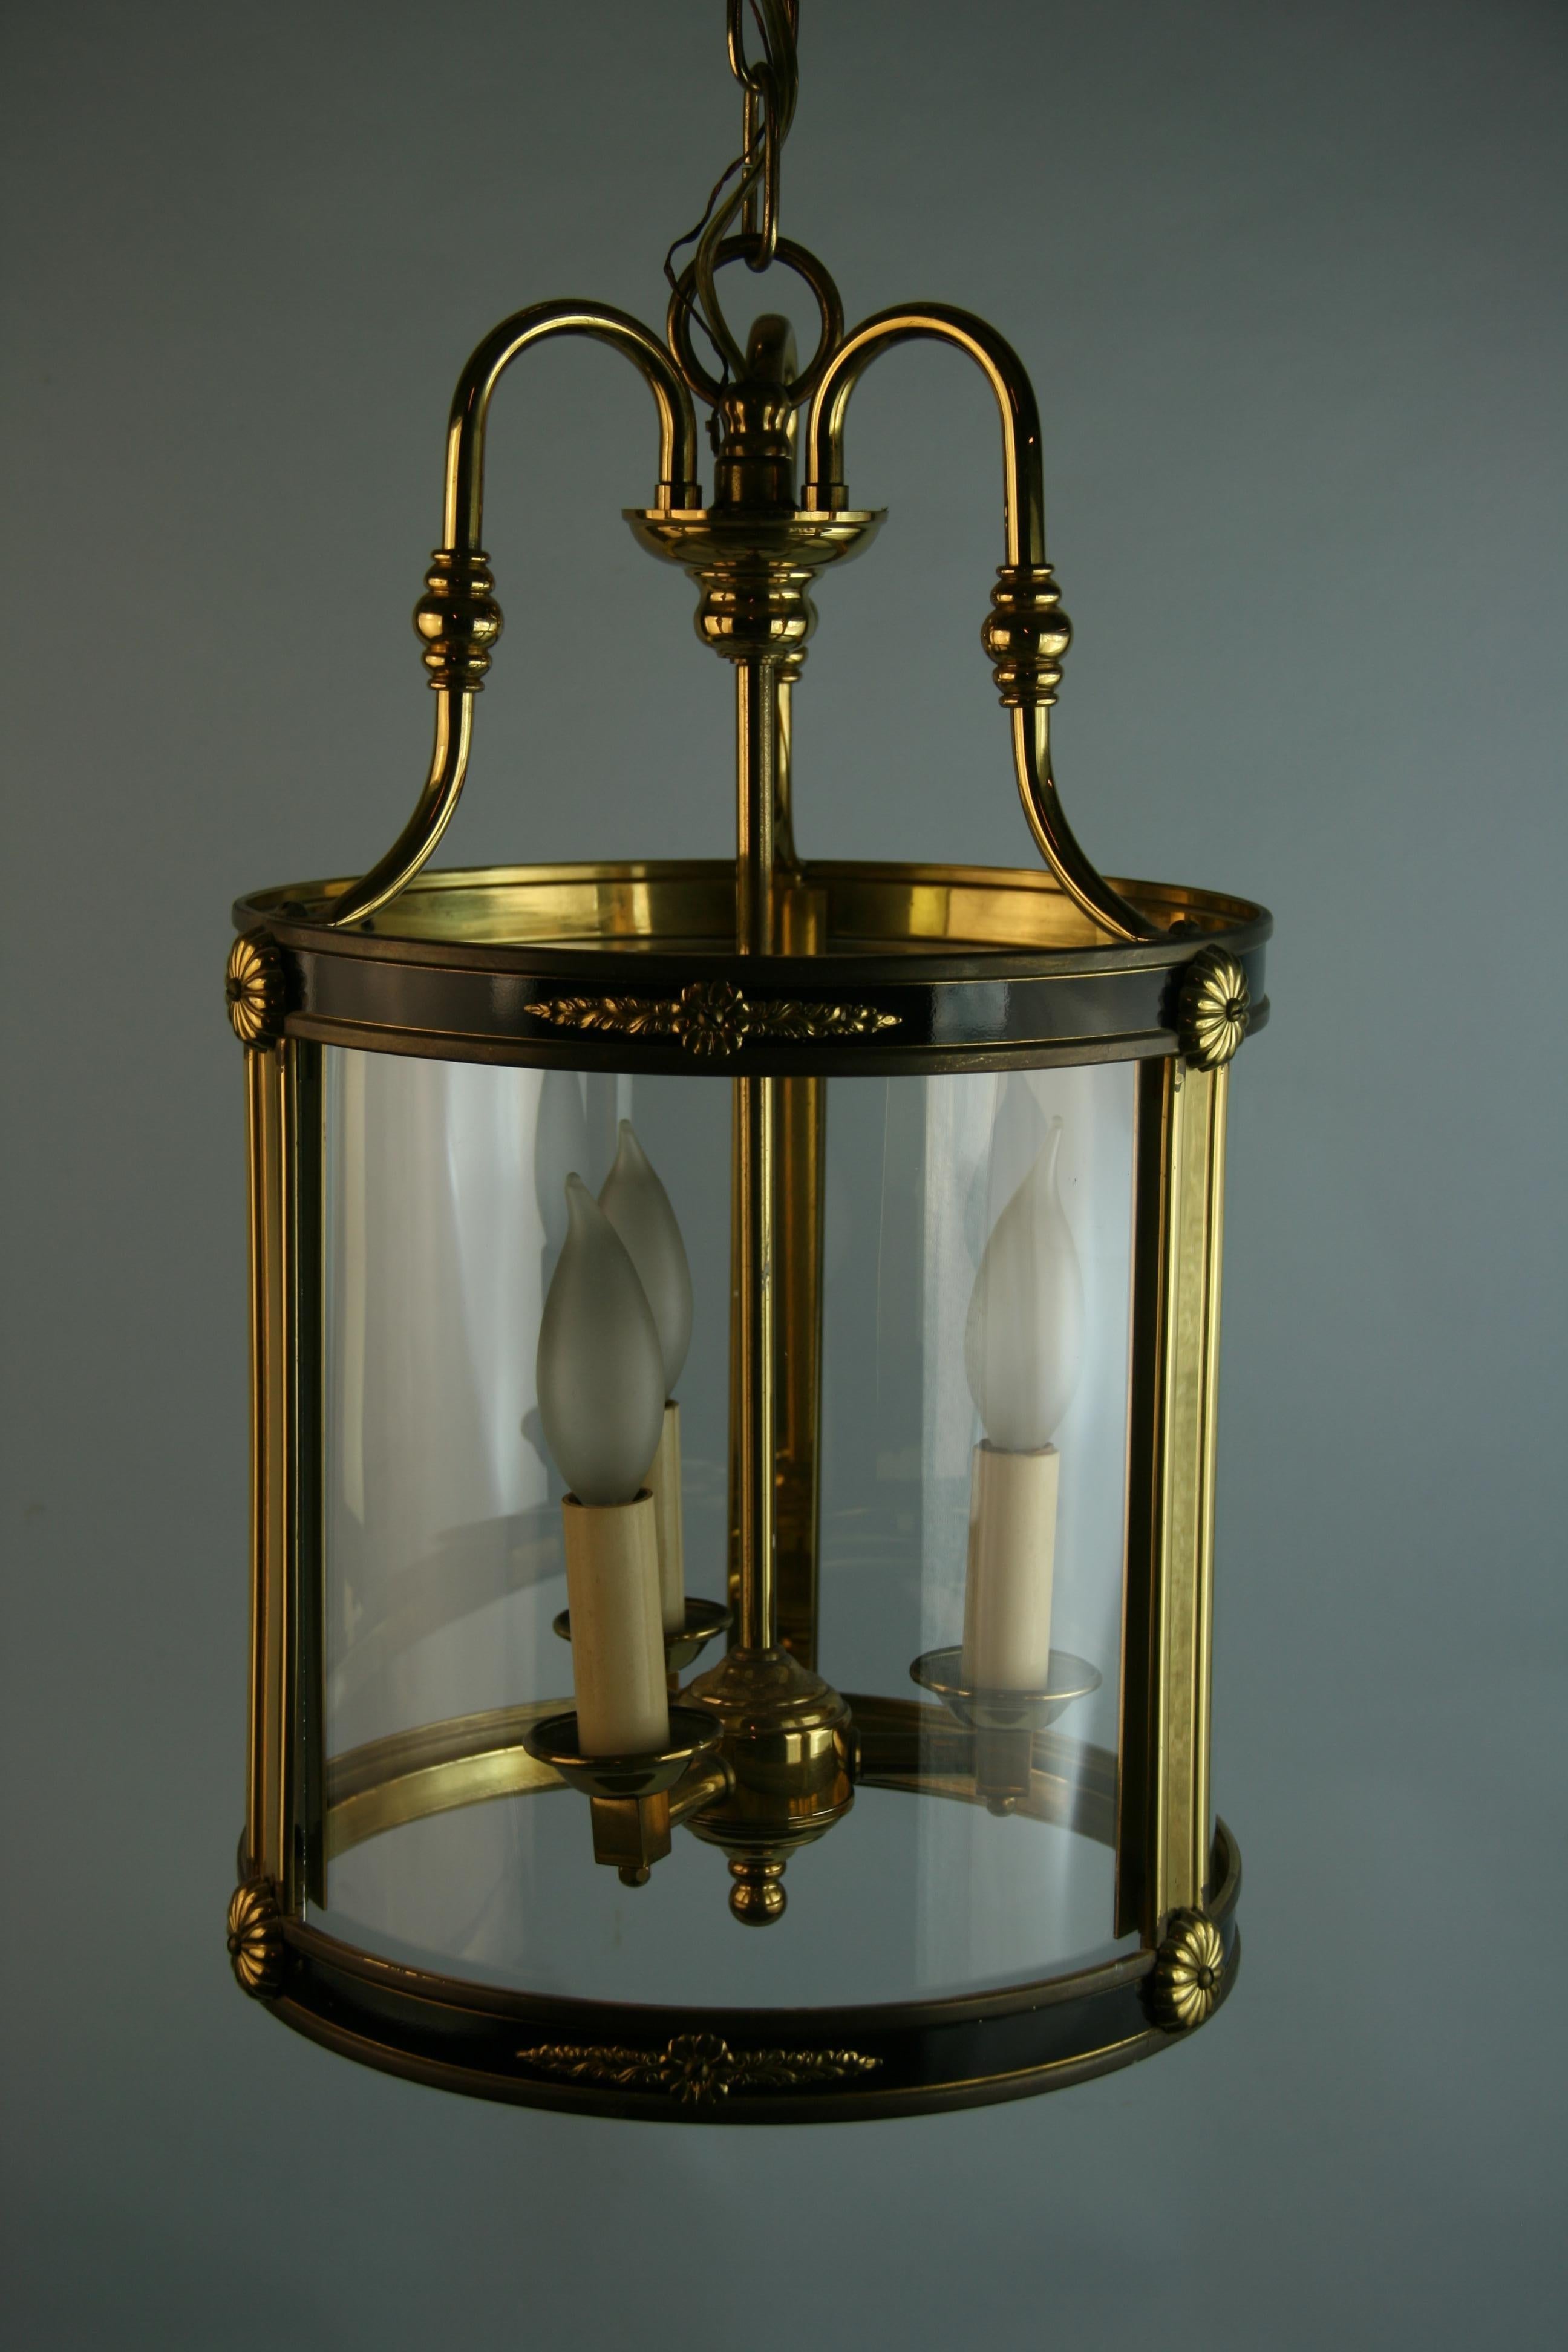 1249 Brass and glass federal style lantern
overall height with chain and canopy 28